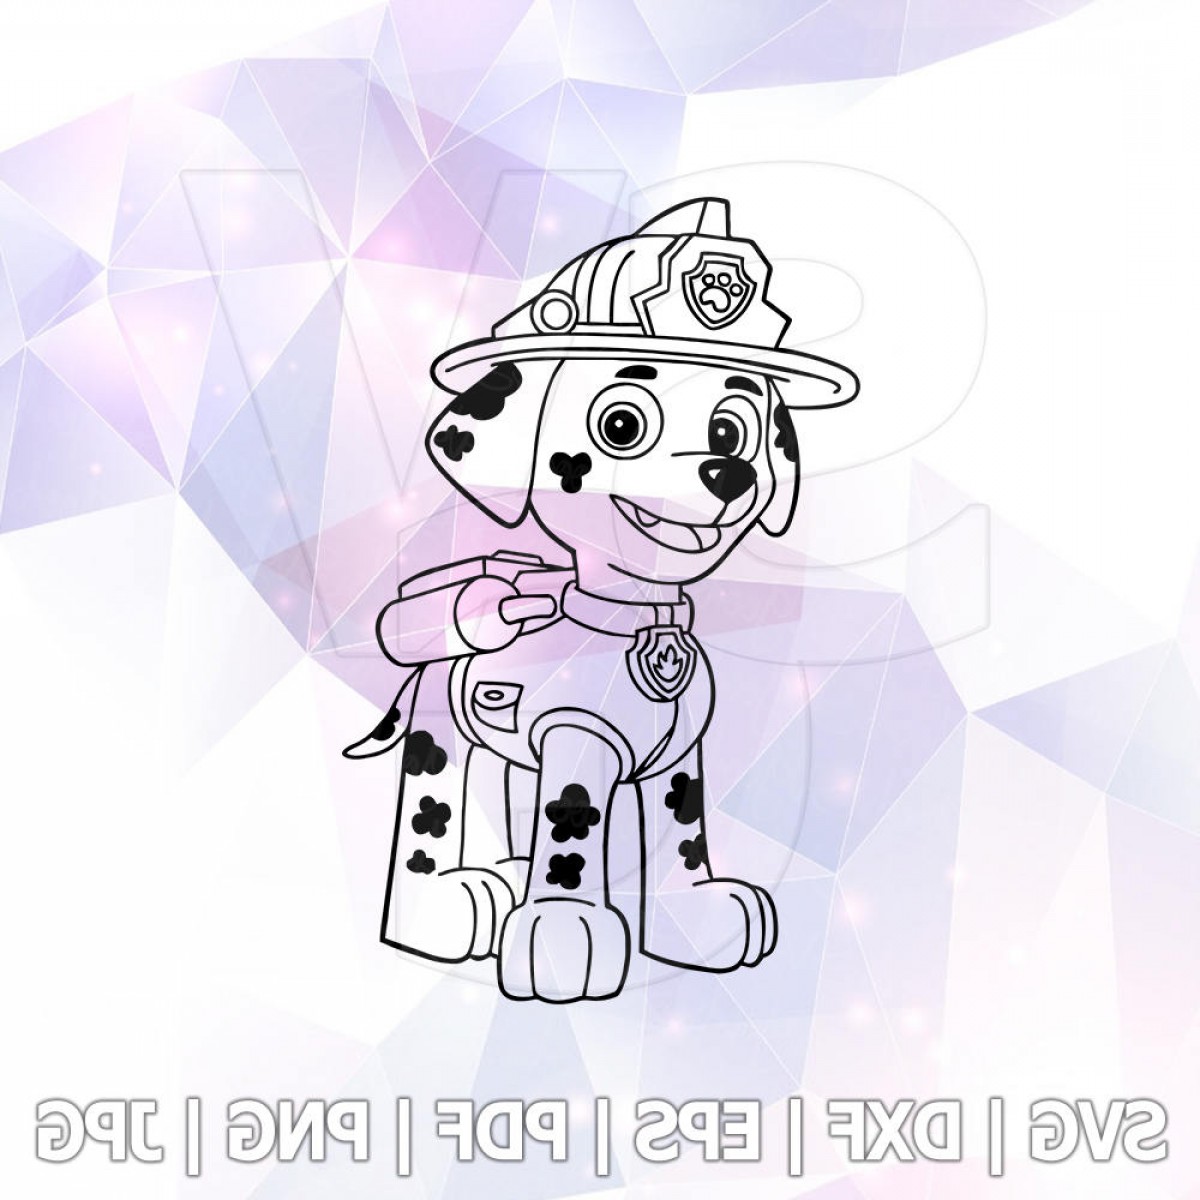 Download Free Paw Patrol Vector At Vectorified Com Collection Of Paw Patrol SVG DXF Cut File